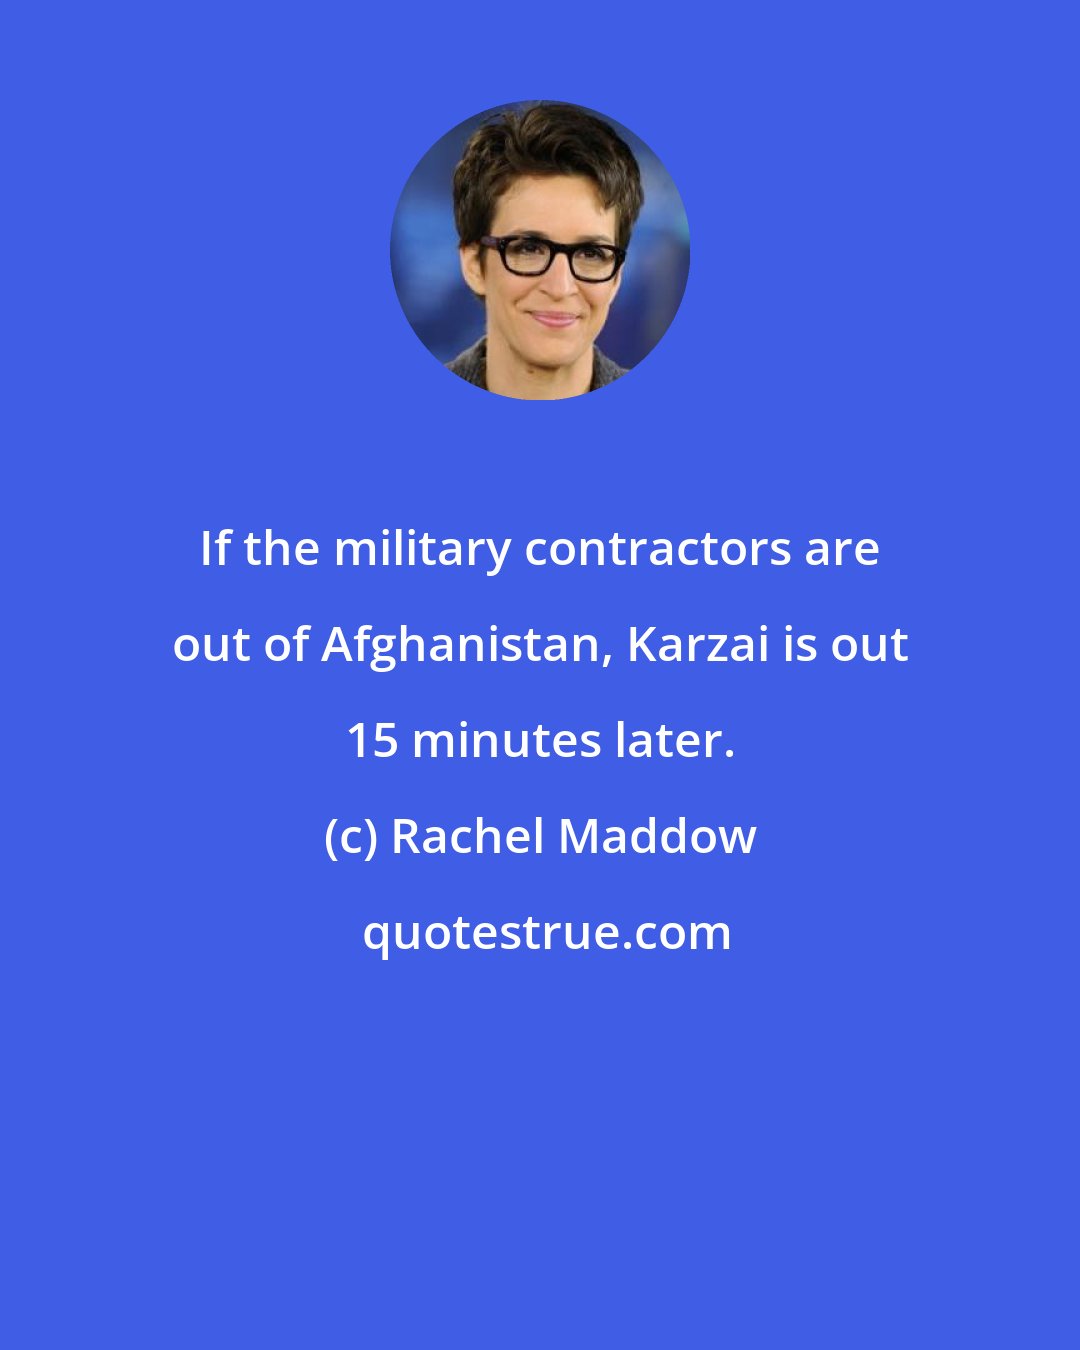 Rachel Maddow: If the military contractors are out of Afghanistan, Karzai is out 15 minutes later.